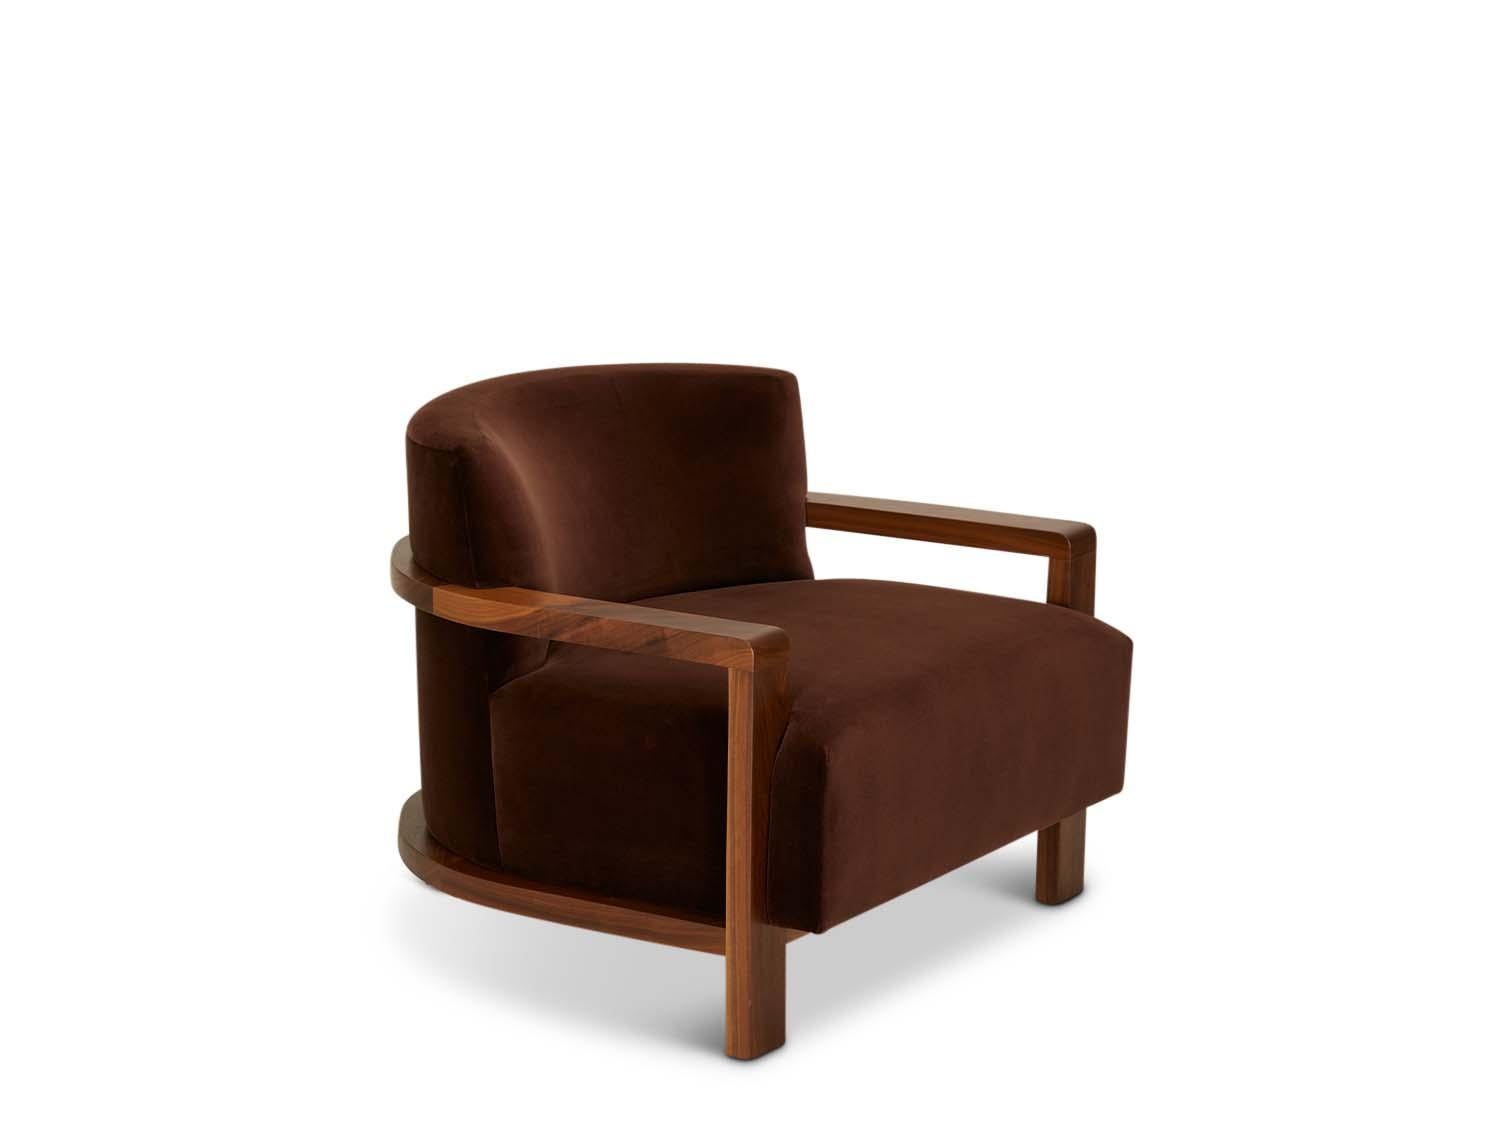 The carrillo lounge chair features a curved solid wood frame and upholstered seating.

The Lawson-Fenning collection is designed and handmade in Los Angeles, California. Reach out to discover what options are currently in stock.
 